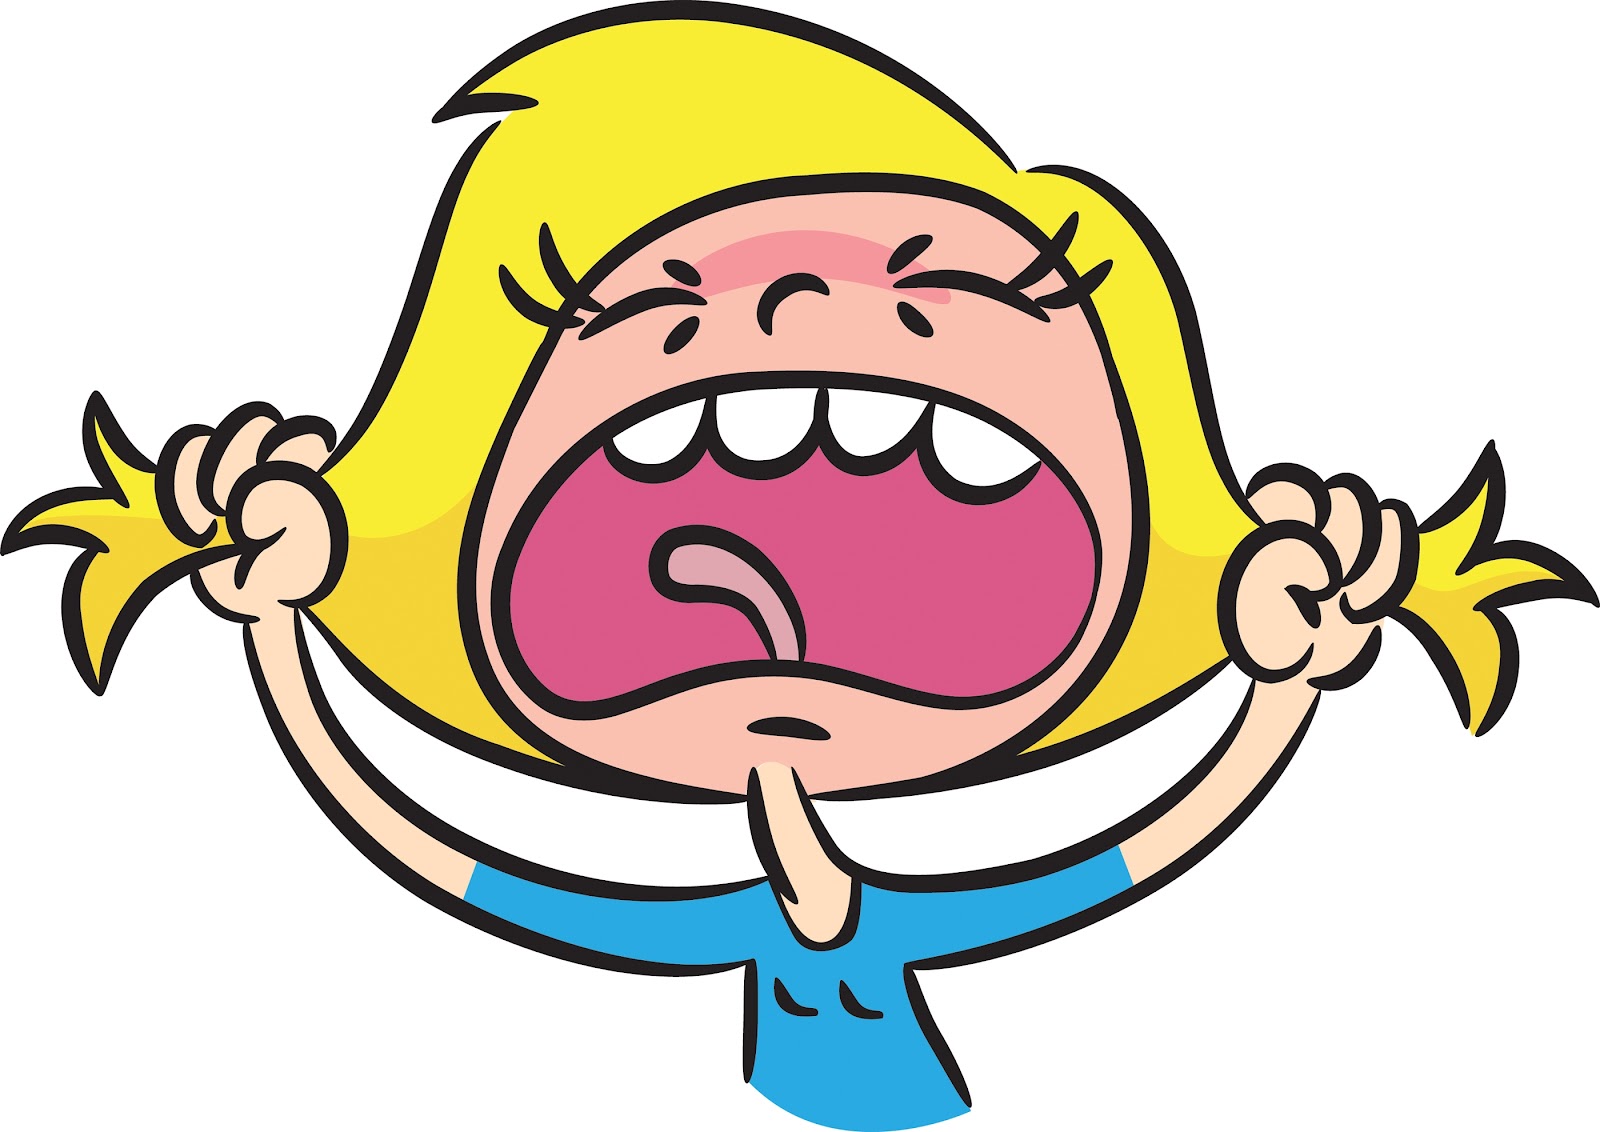 Free Cartoon Images Of Stress, Download Free Cartoon Images Of Stress